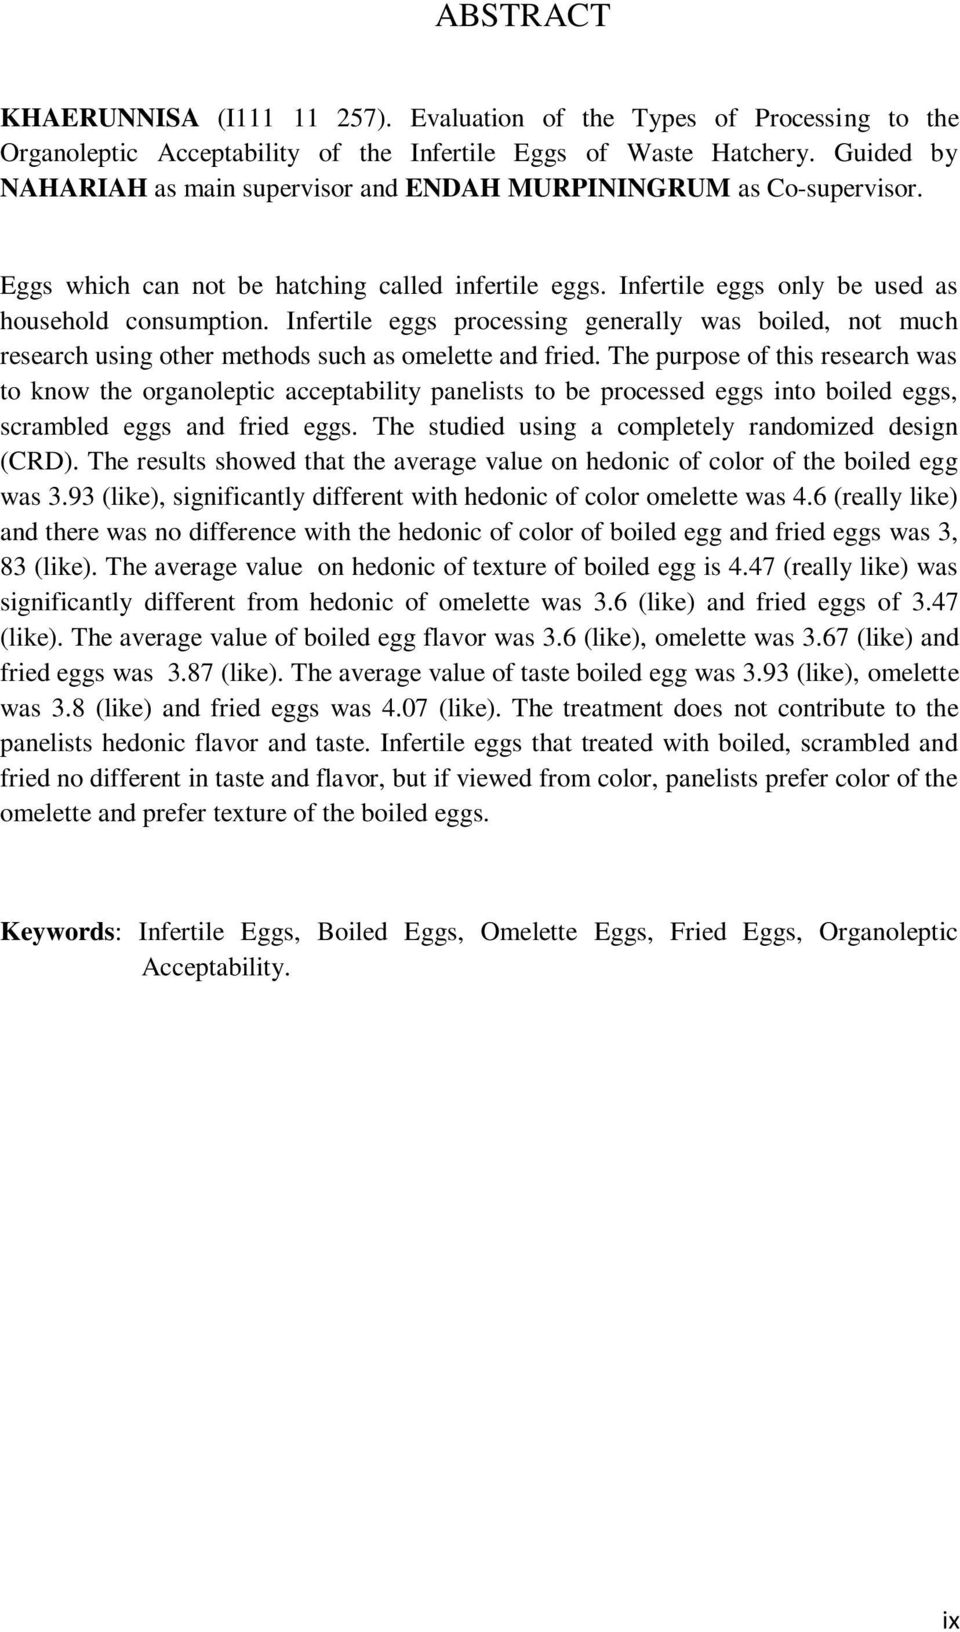 Infertile eggs processing generally was boiled, not much research using other methods such as omelette and fried.